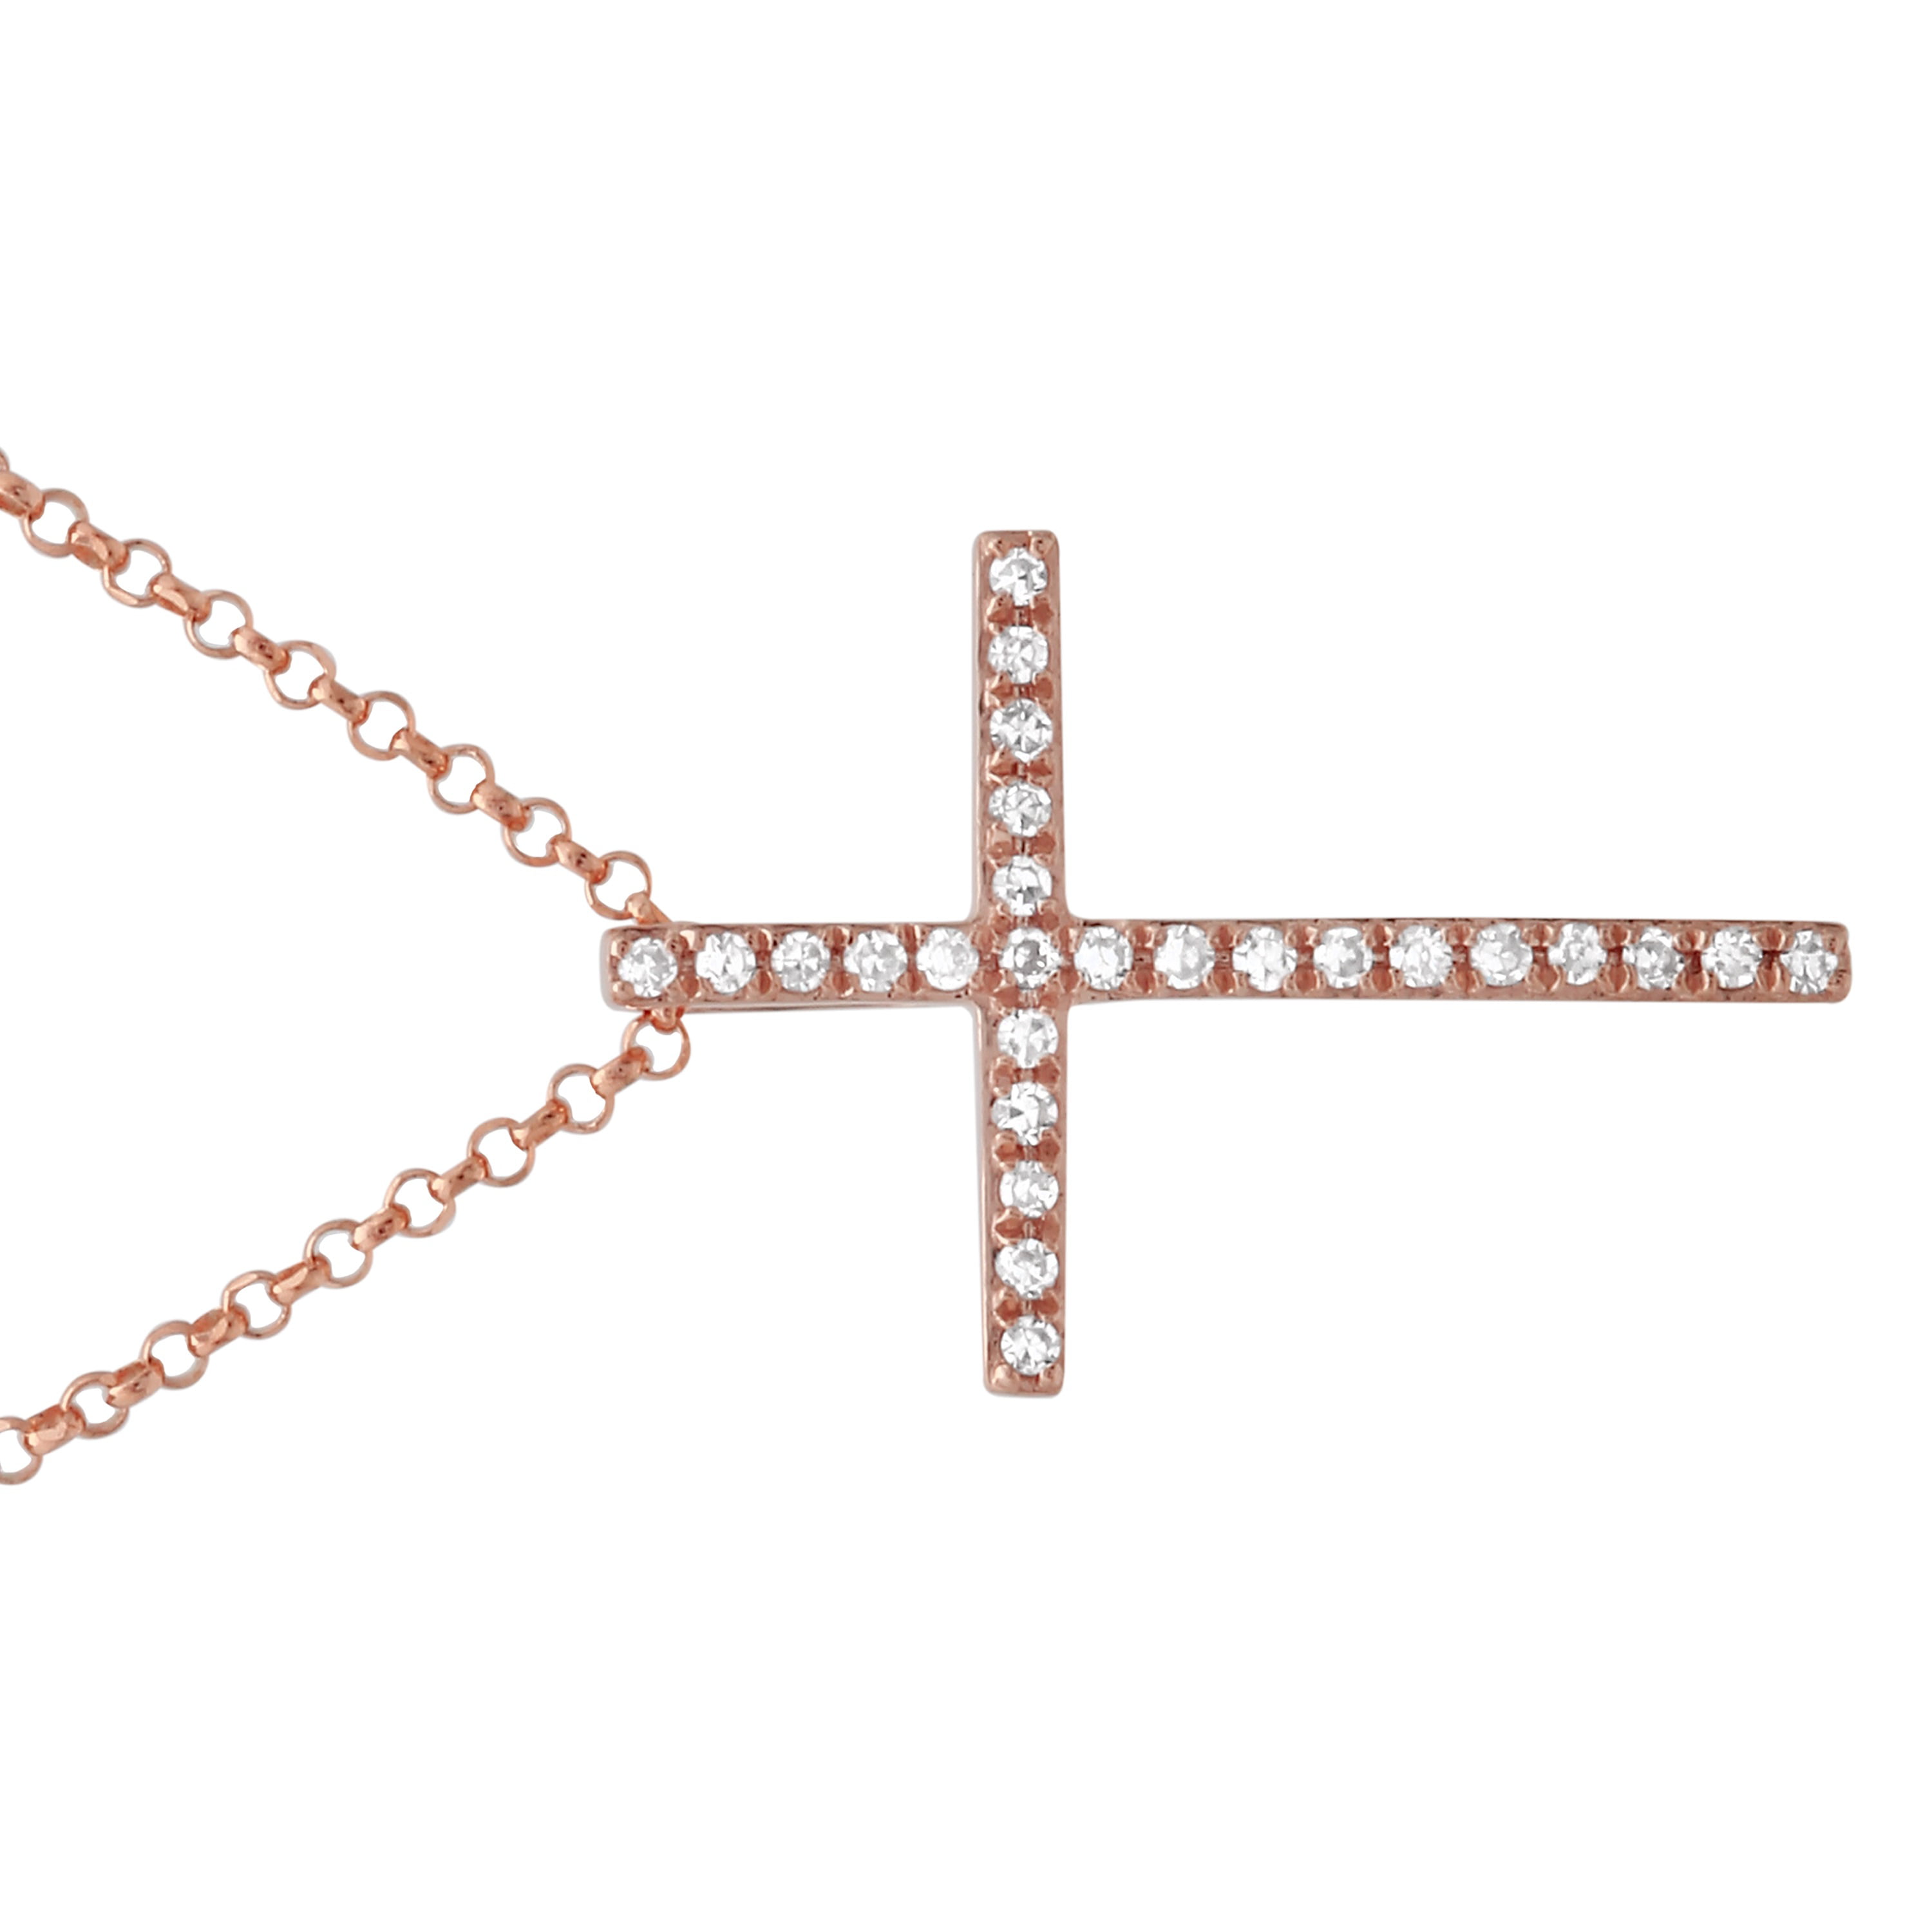 14k Rose Gold Diamond Pave Cross Pendant Necklace (0.07 cttw, H-I Color,  SI2-I1 Clarity), 16+2